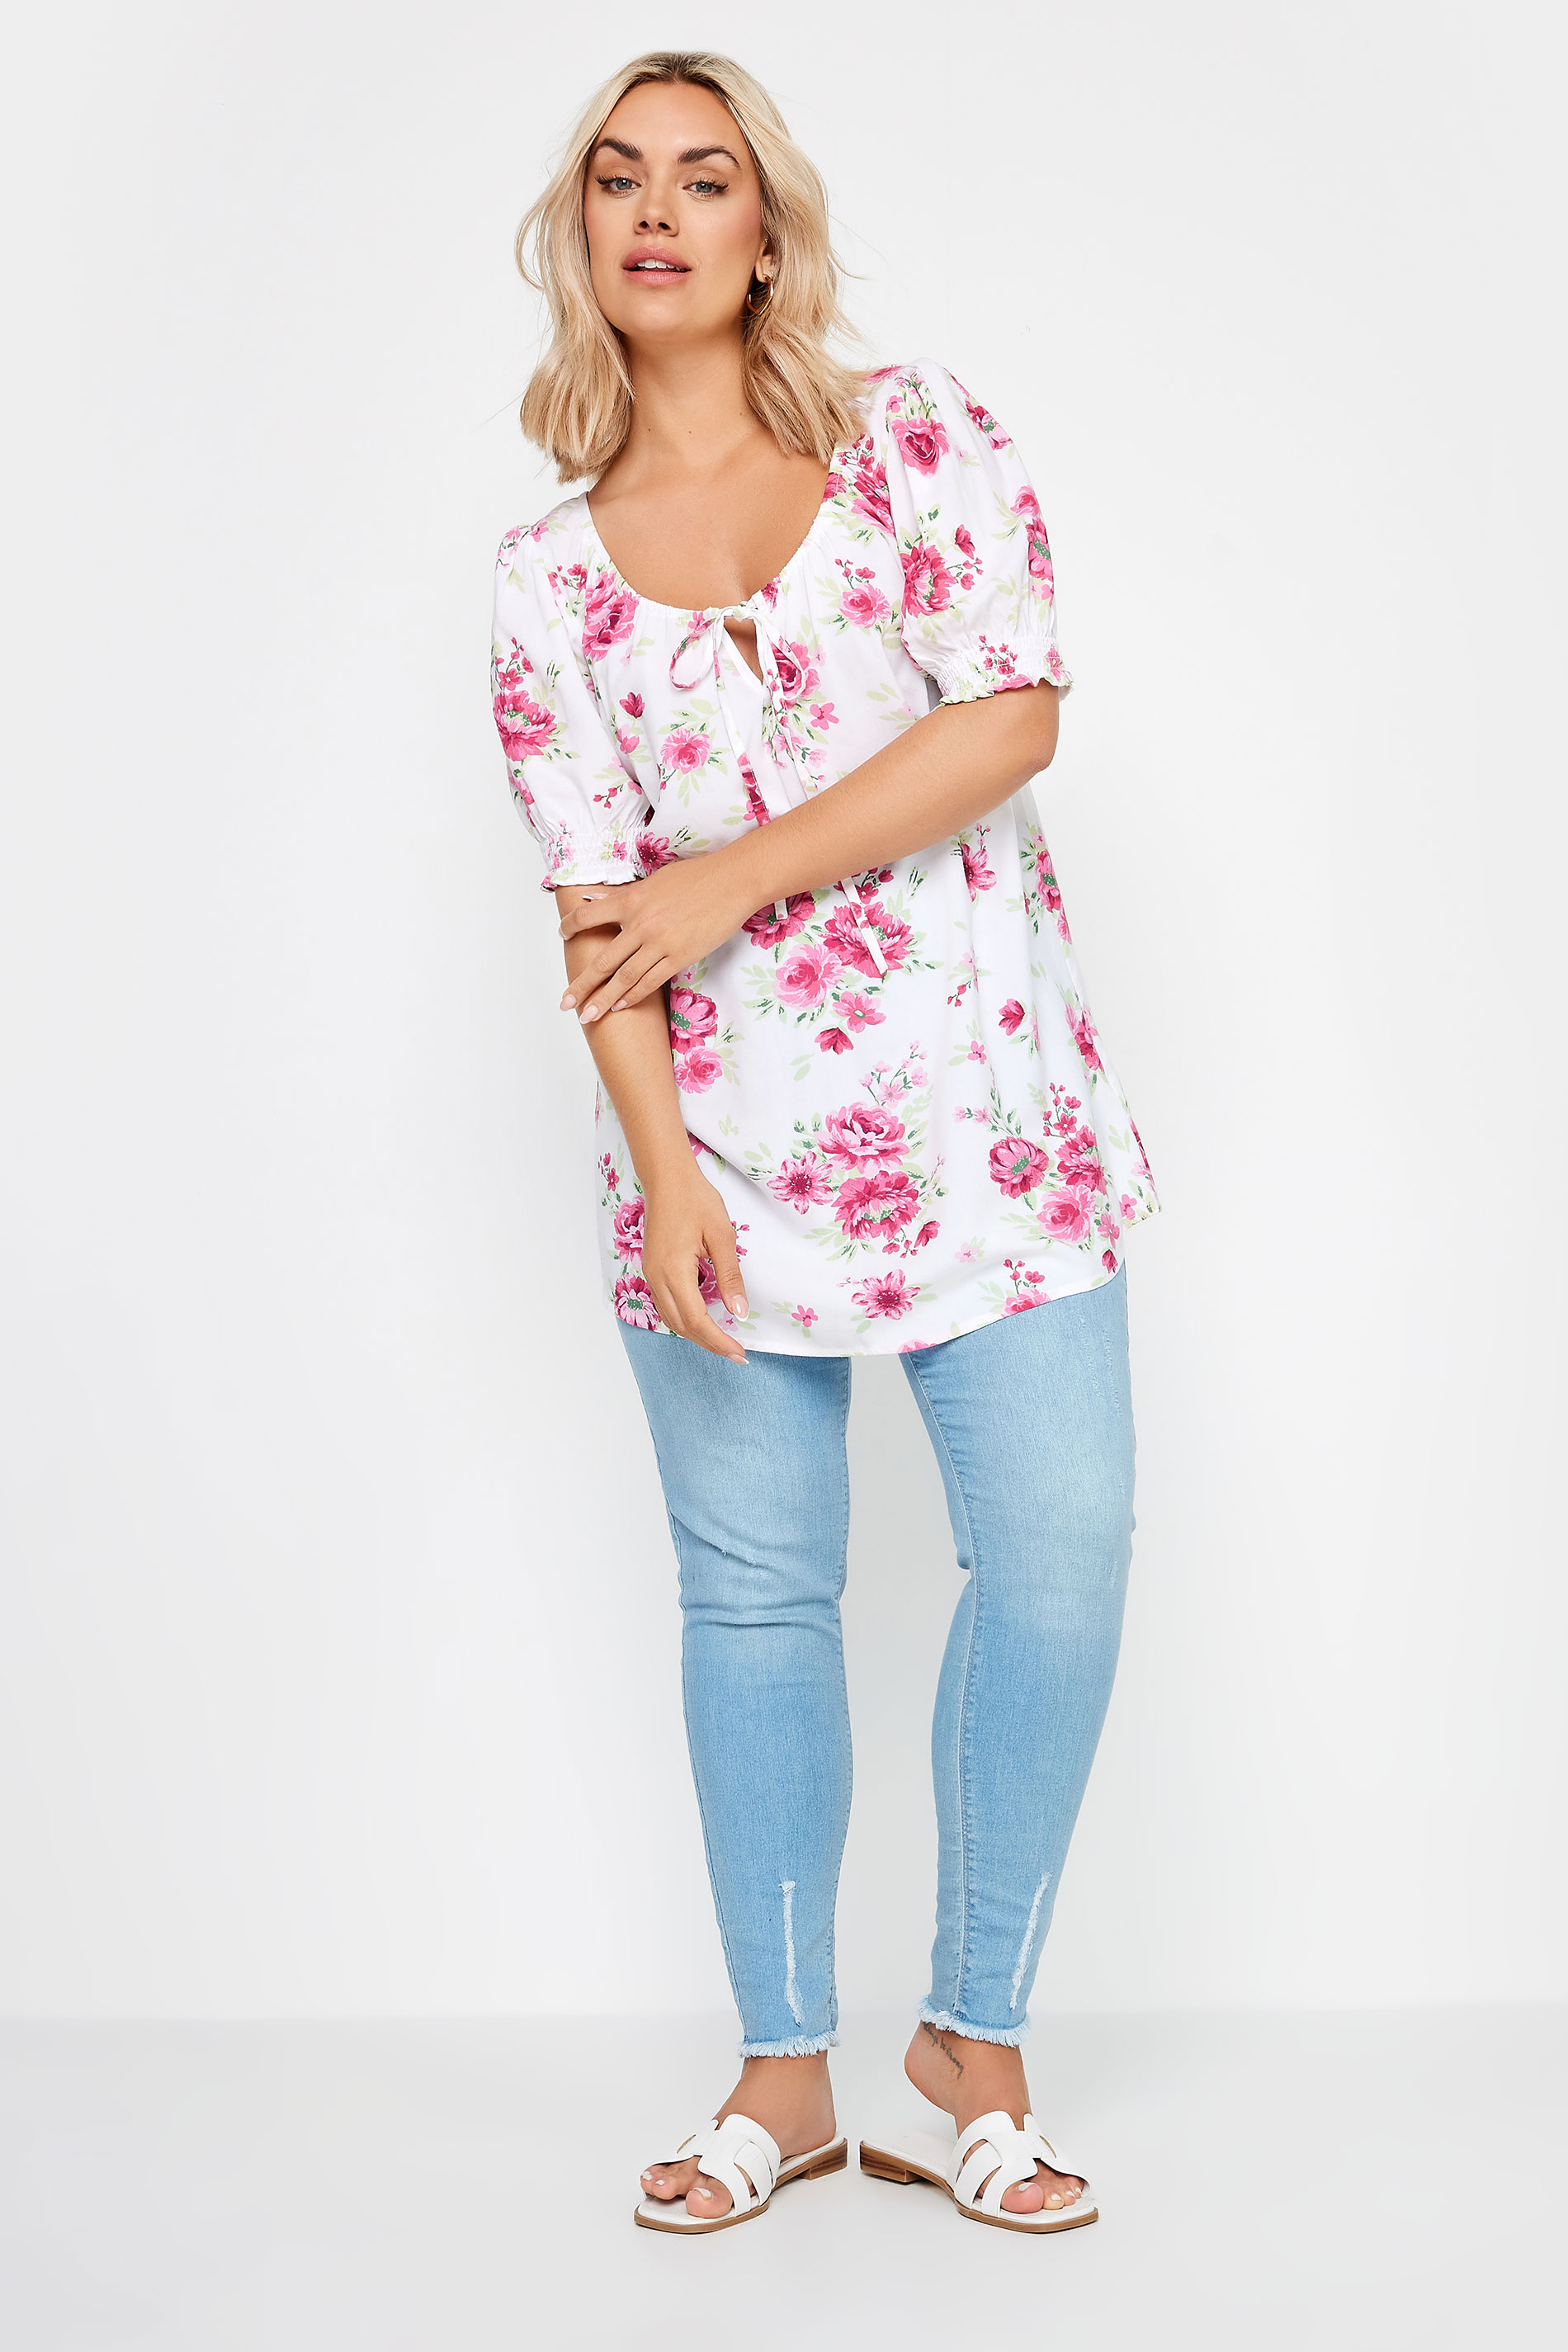 YOURS Plus Size White & Pink Floral Print Tie Neck Top | Yours Clothing 2